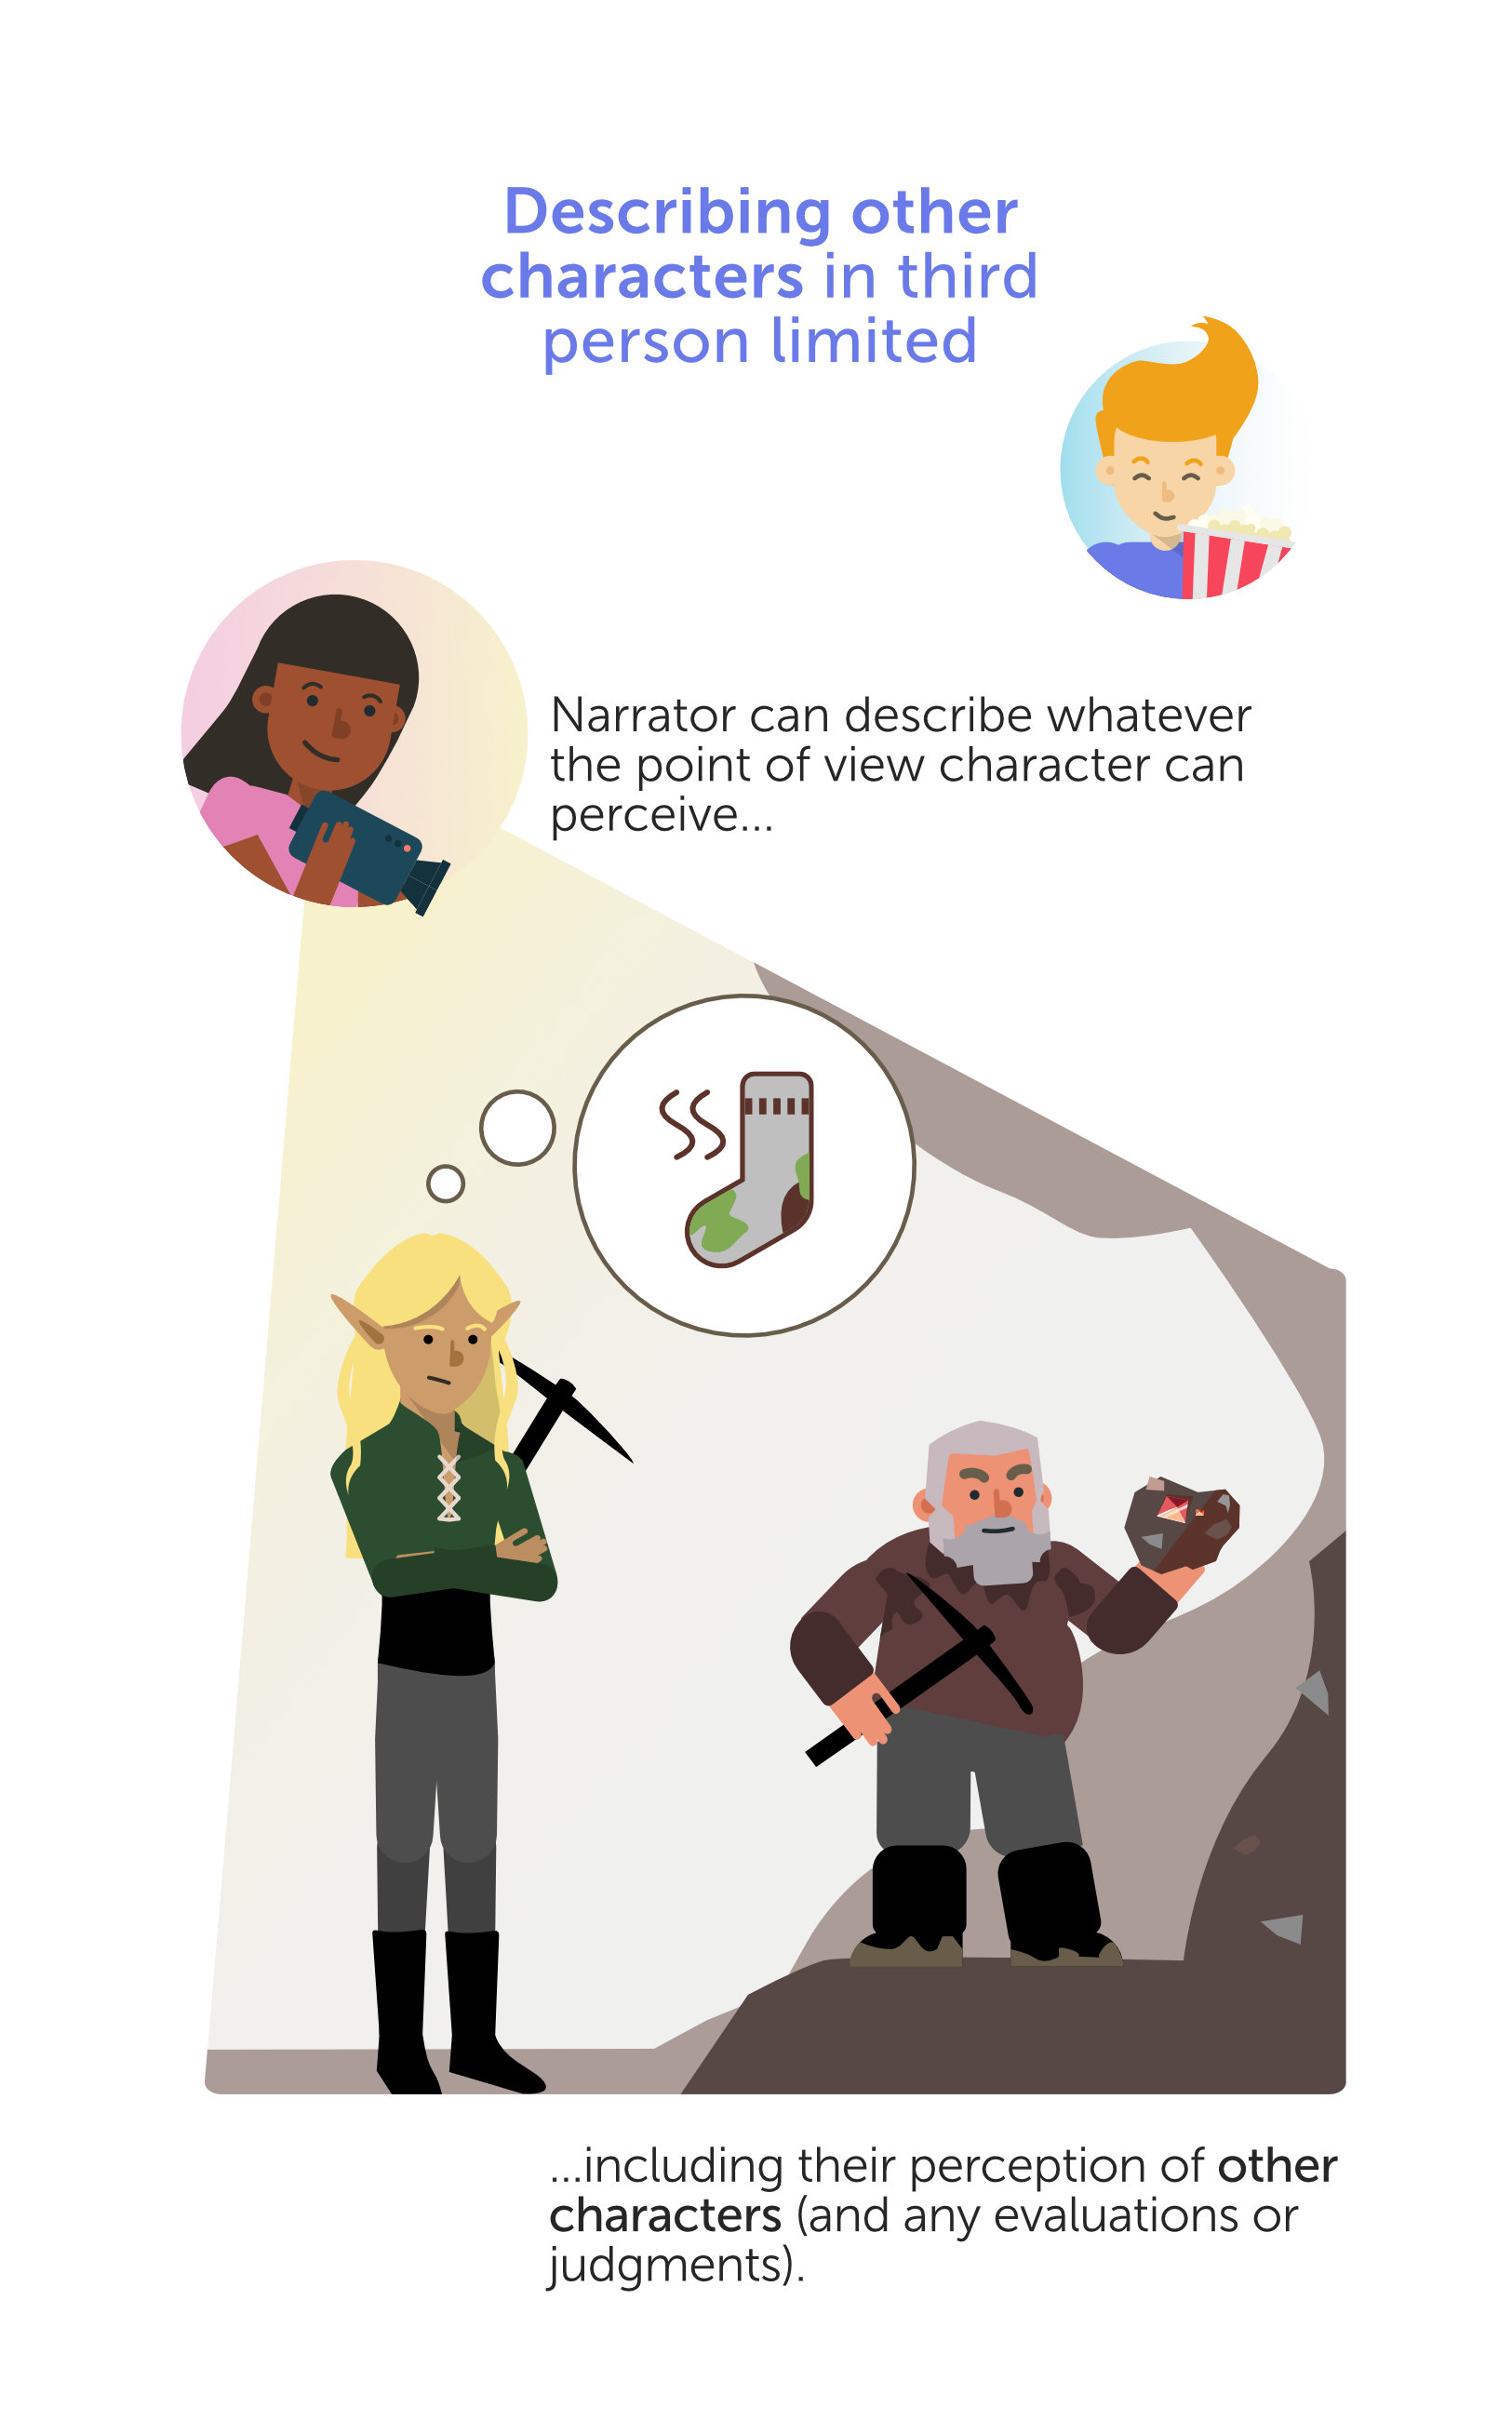 graphic showing narrator looking at a scene of an elf and a dwarf character mining for gems. The elf is the point of view character and he is thinking that the dwarf is stinky. The dwarf is examining a rock but we don’t know what he is thinking.